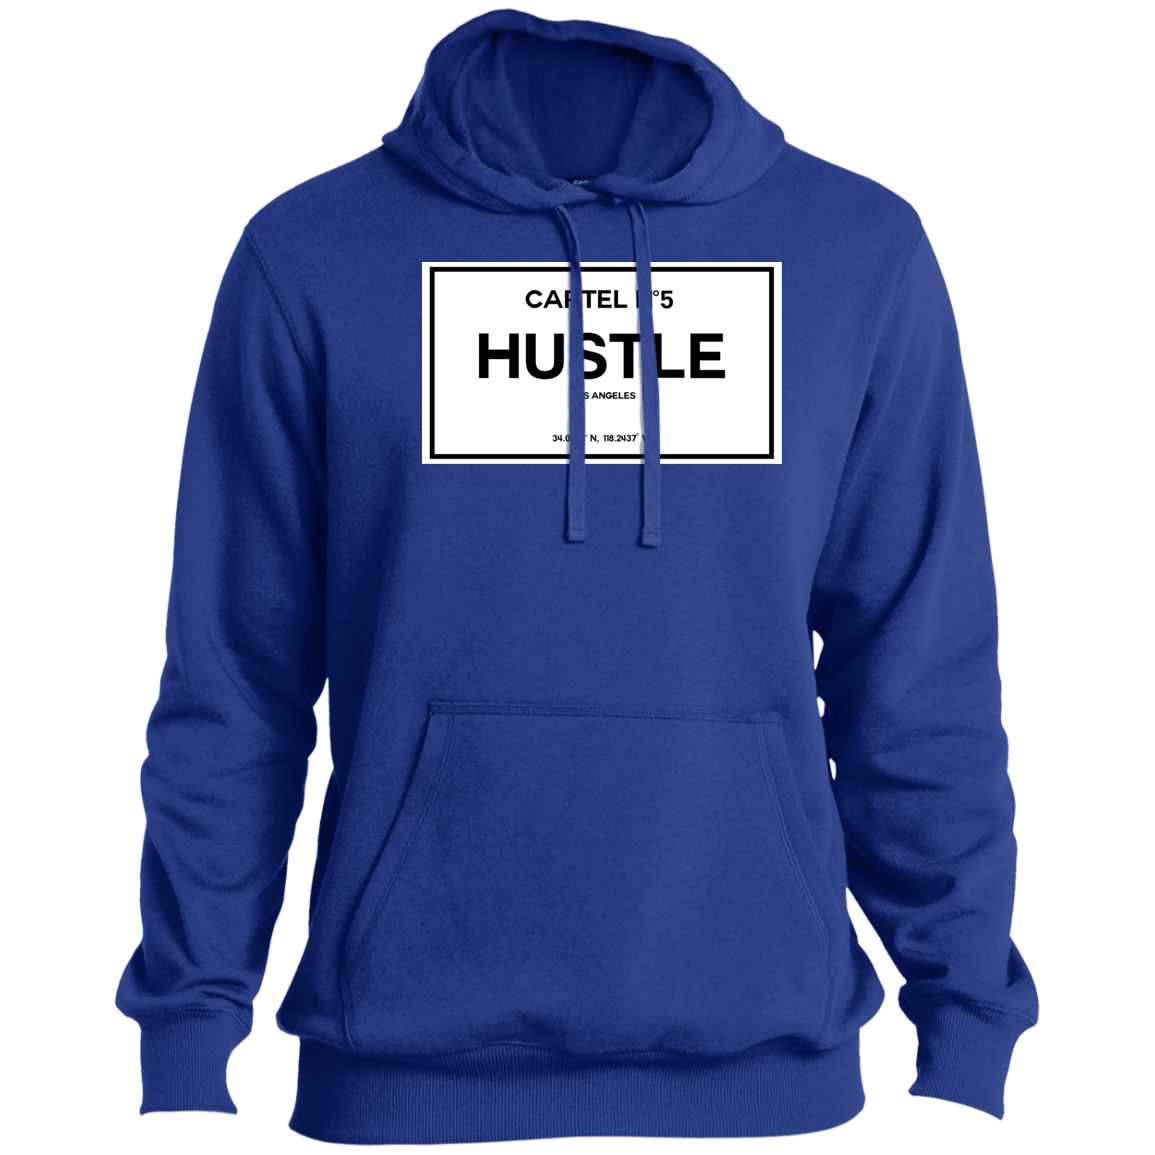 Cartel No 5 Hustle Tall Pullover Hoodie - Hustle Everything